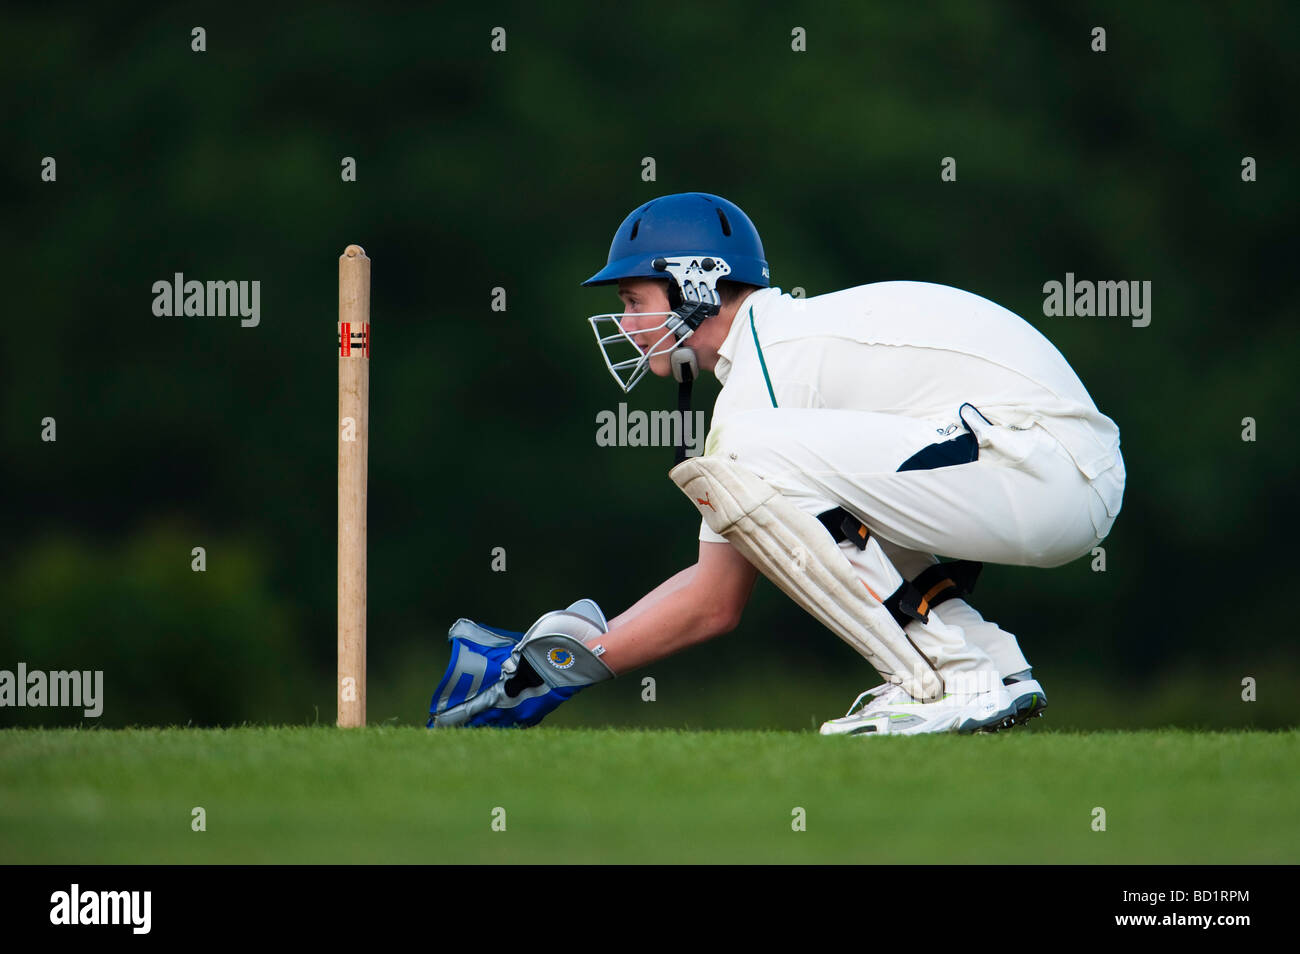 Wicket keeper in position behind stumps waiting for delivery Stock Photo -  Alamy